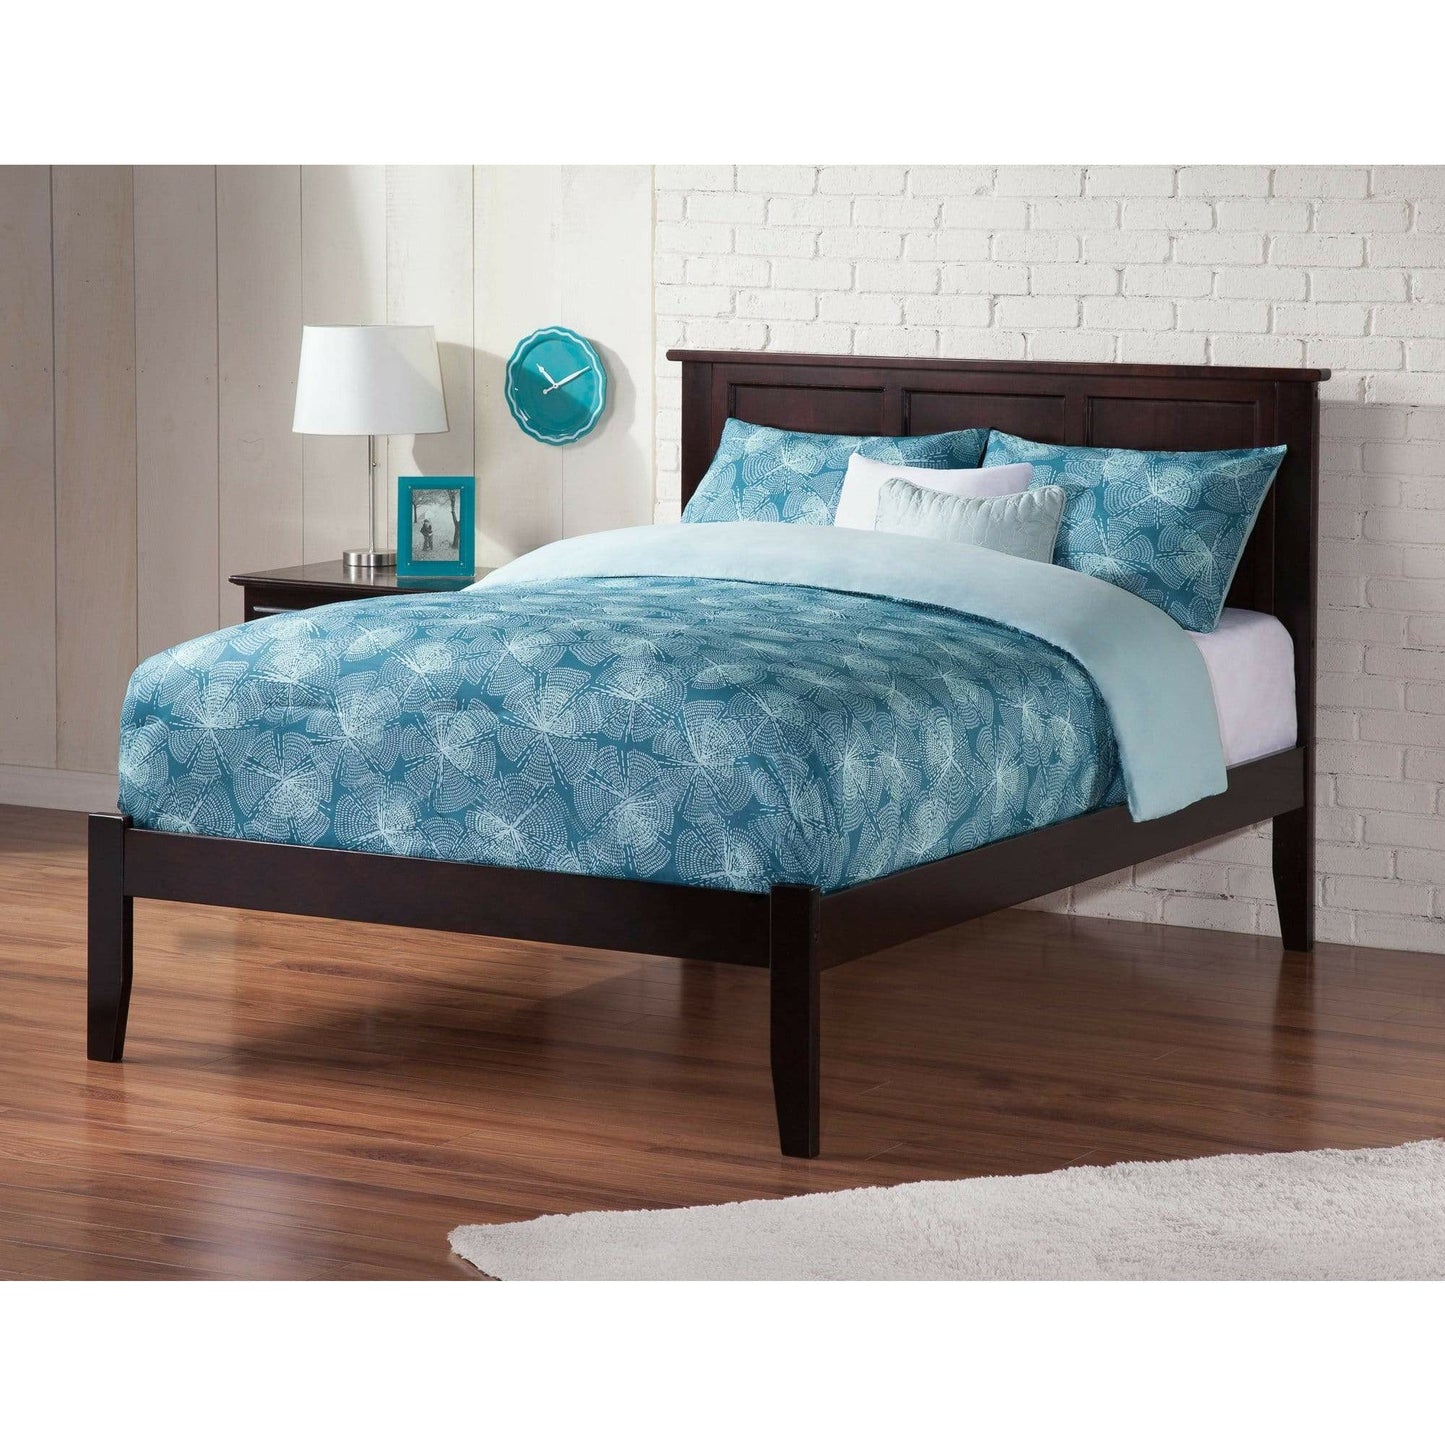 Atlantic Furniture Bed Madison Full Platform Bed with Open Foot Board in Espresso